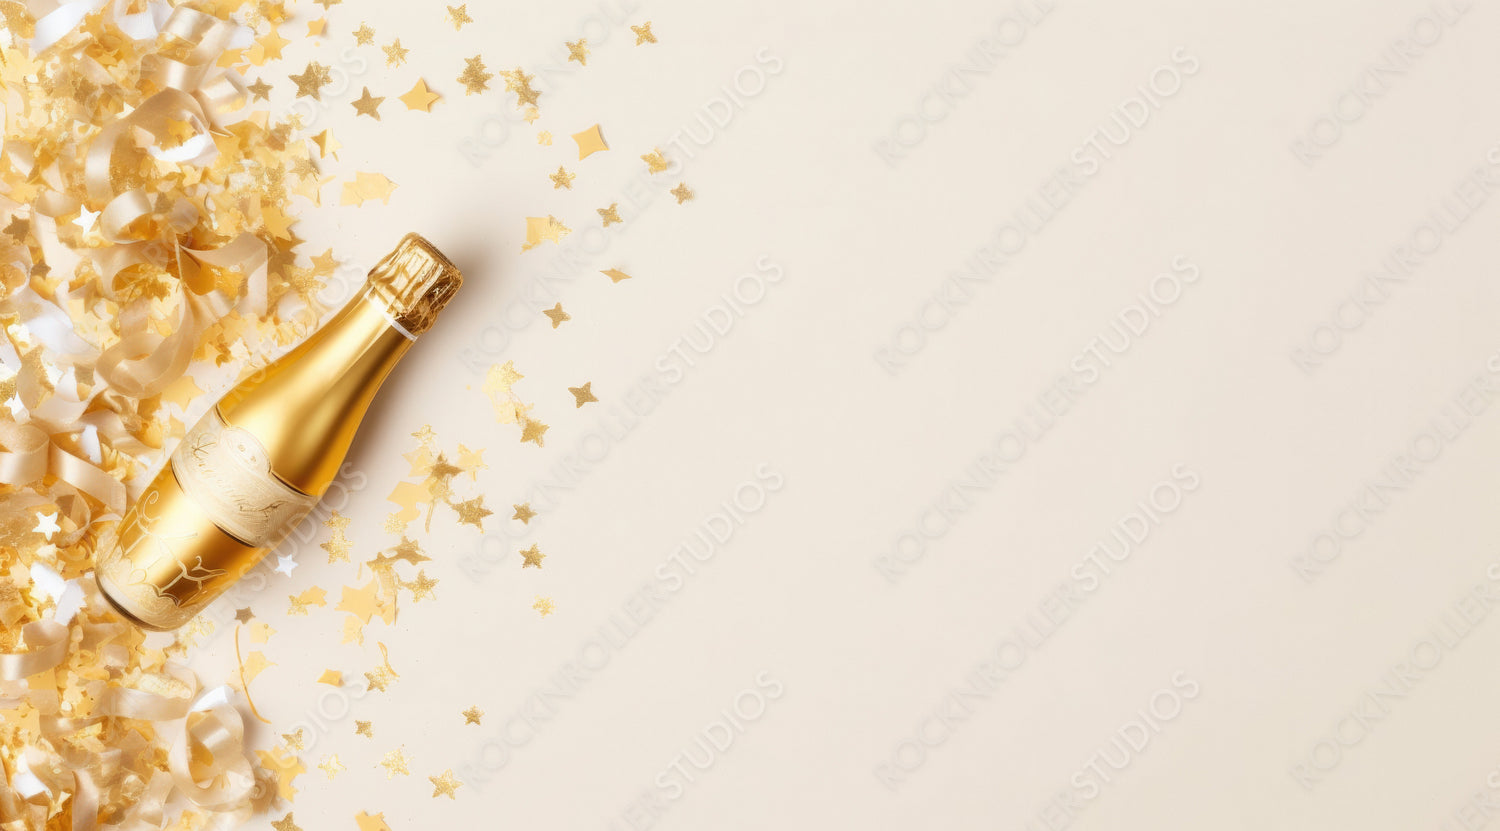 Celebration Background with Golden Champagne Bottle, Confetti Stars and Party Streamers. Christmas, Birthday Or Wedding Concept. Flat Lay.